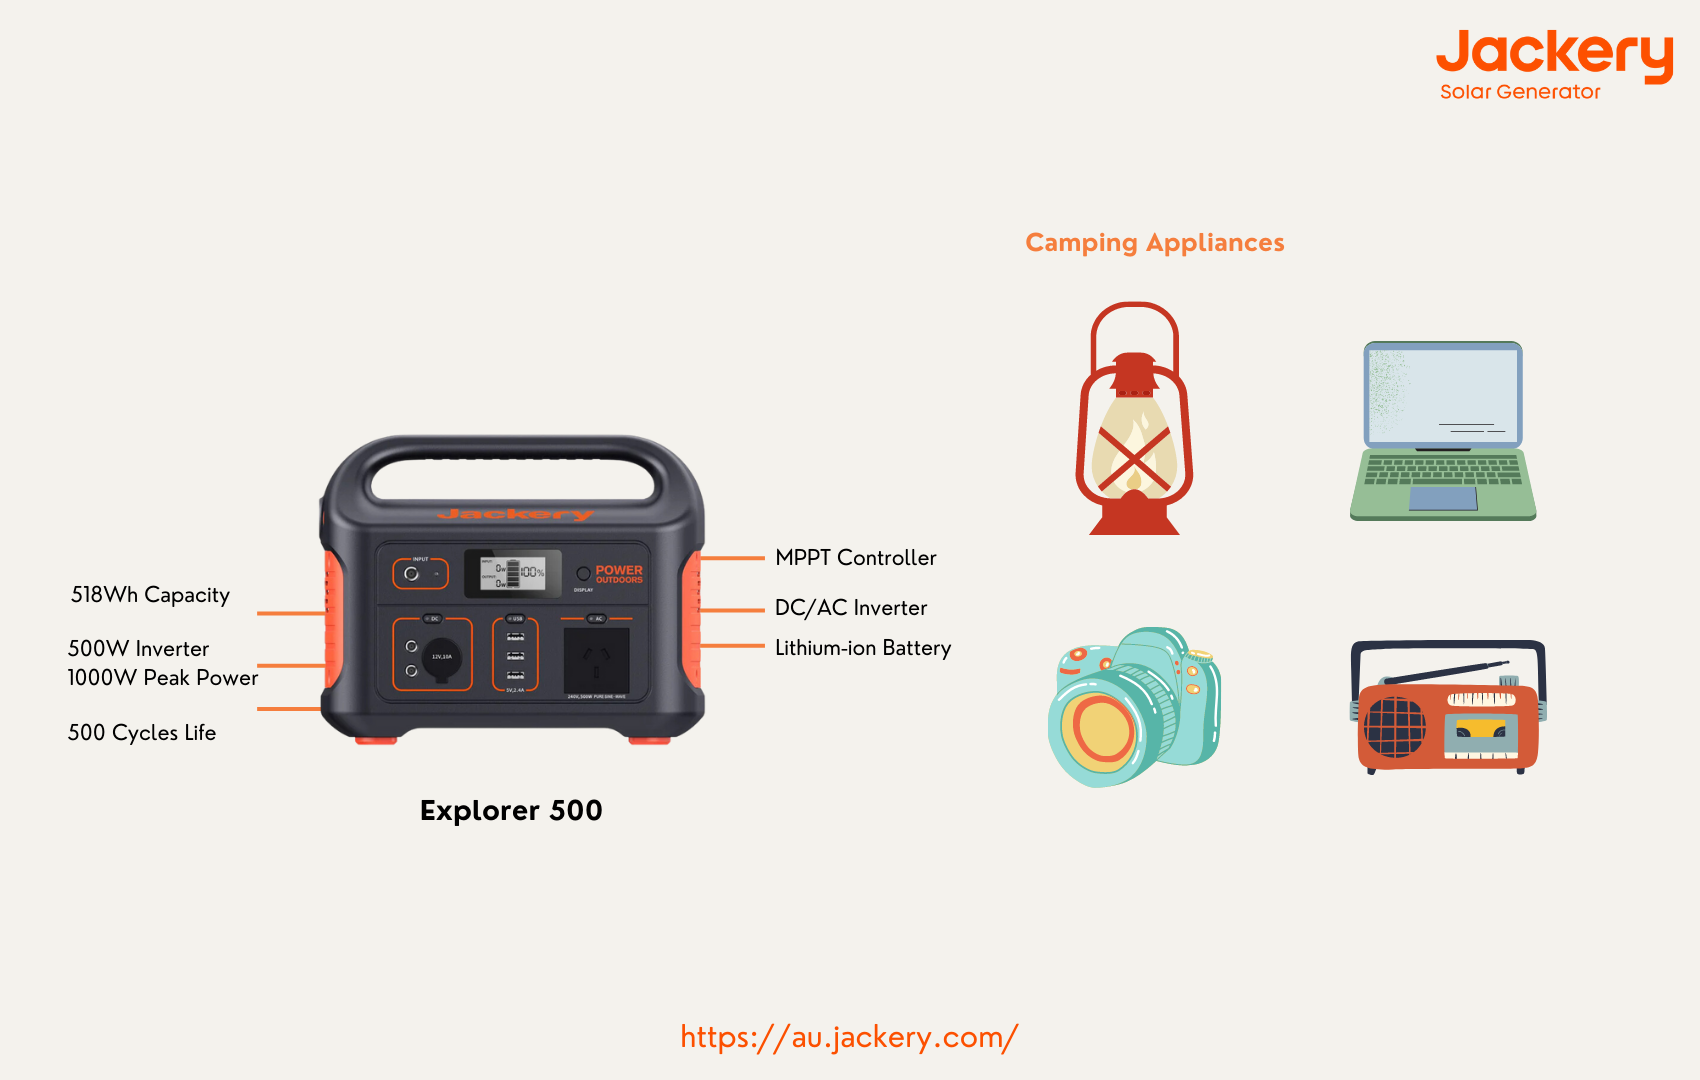 Jackery Explorer 500 for camping